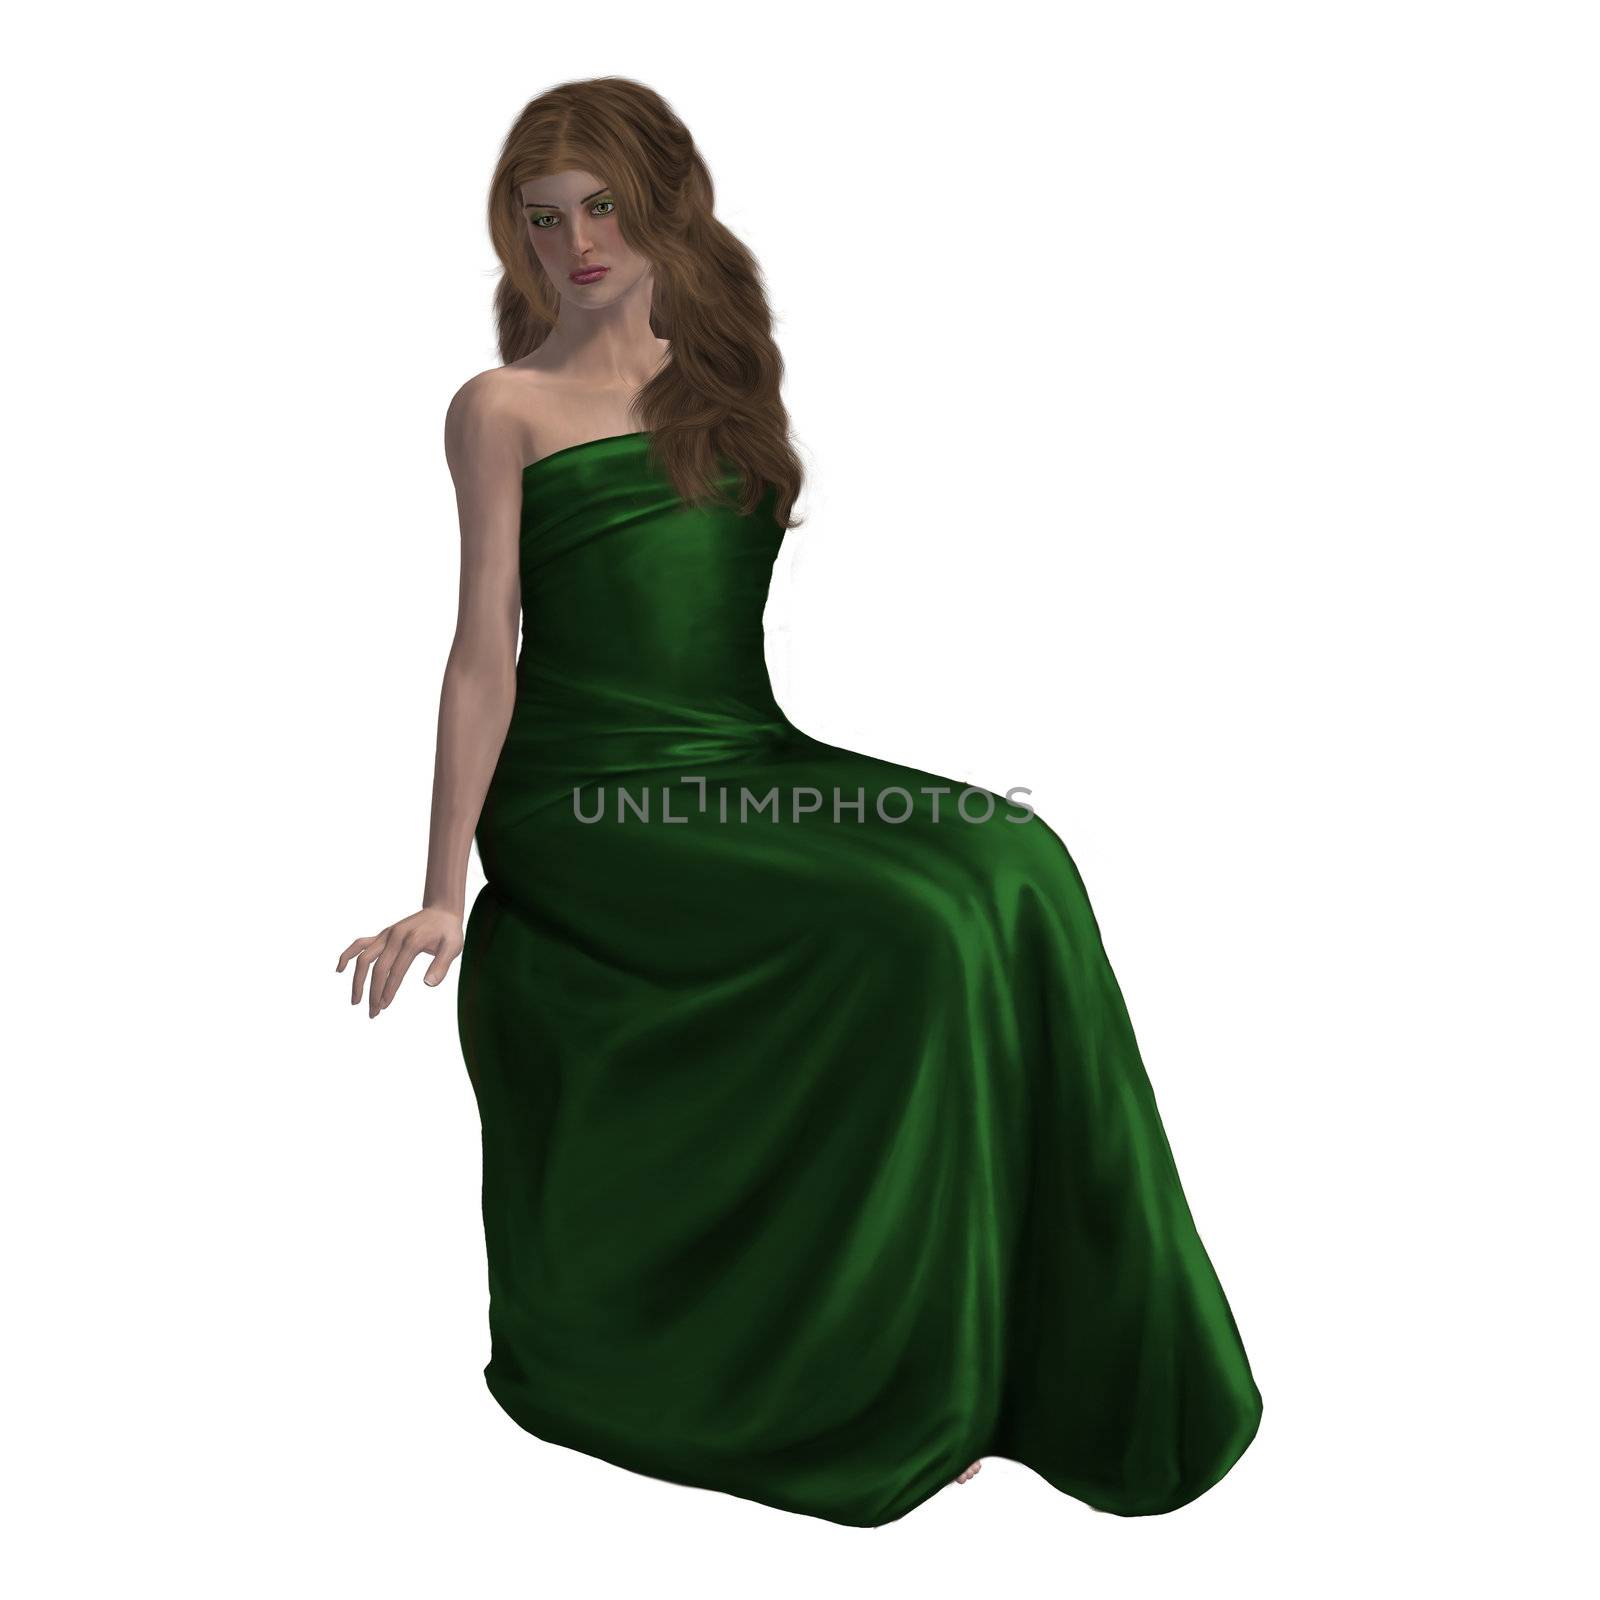 Woman In A Gown by kathygold